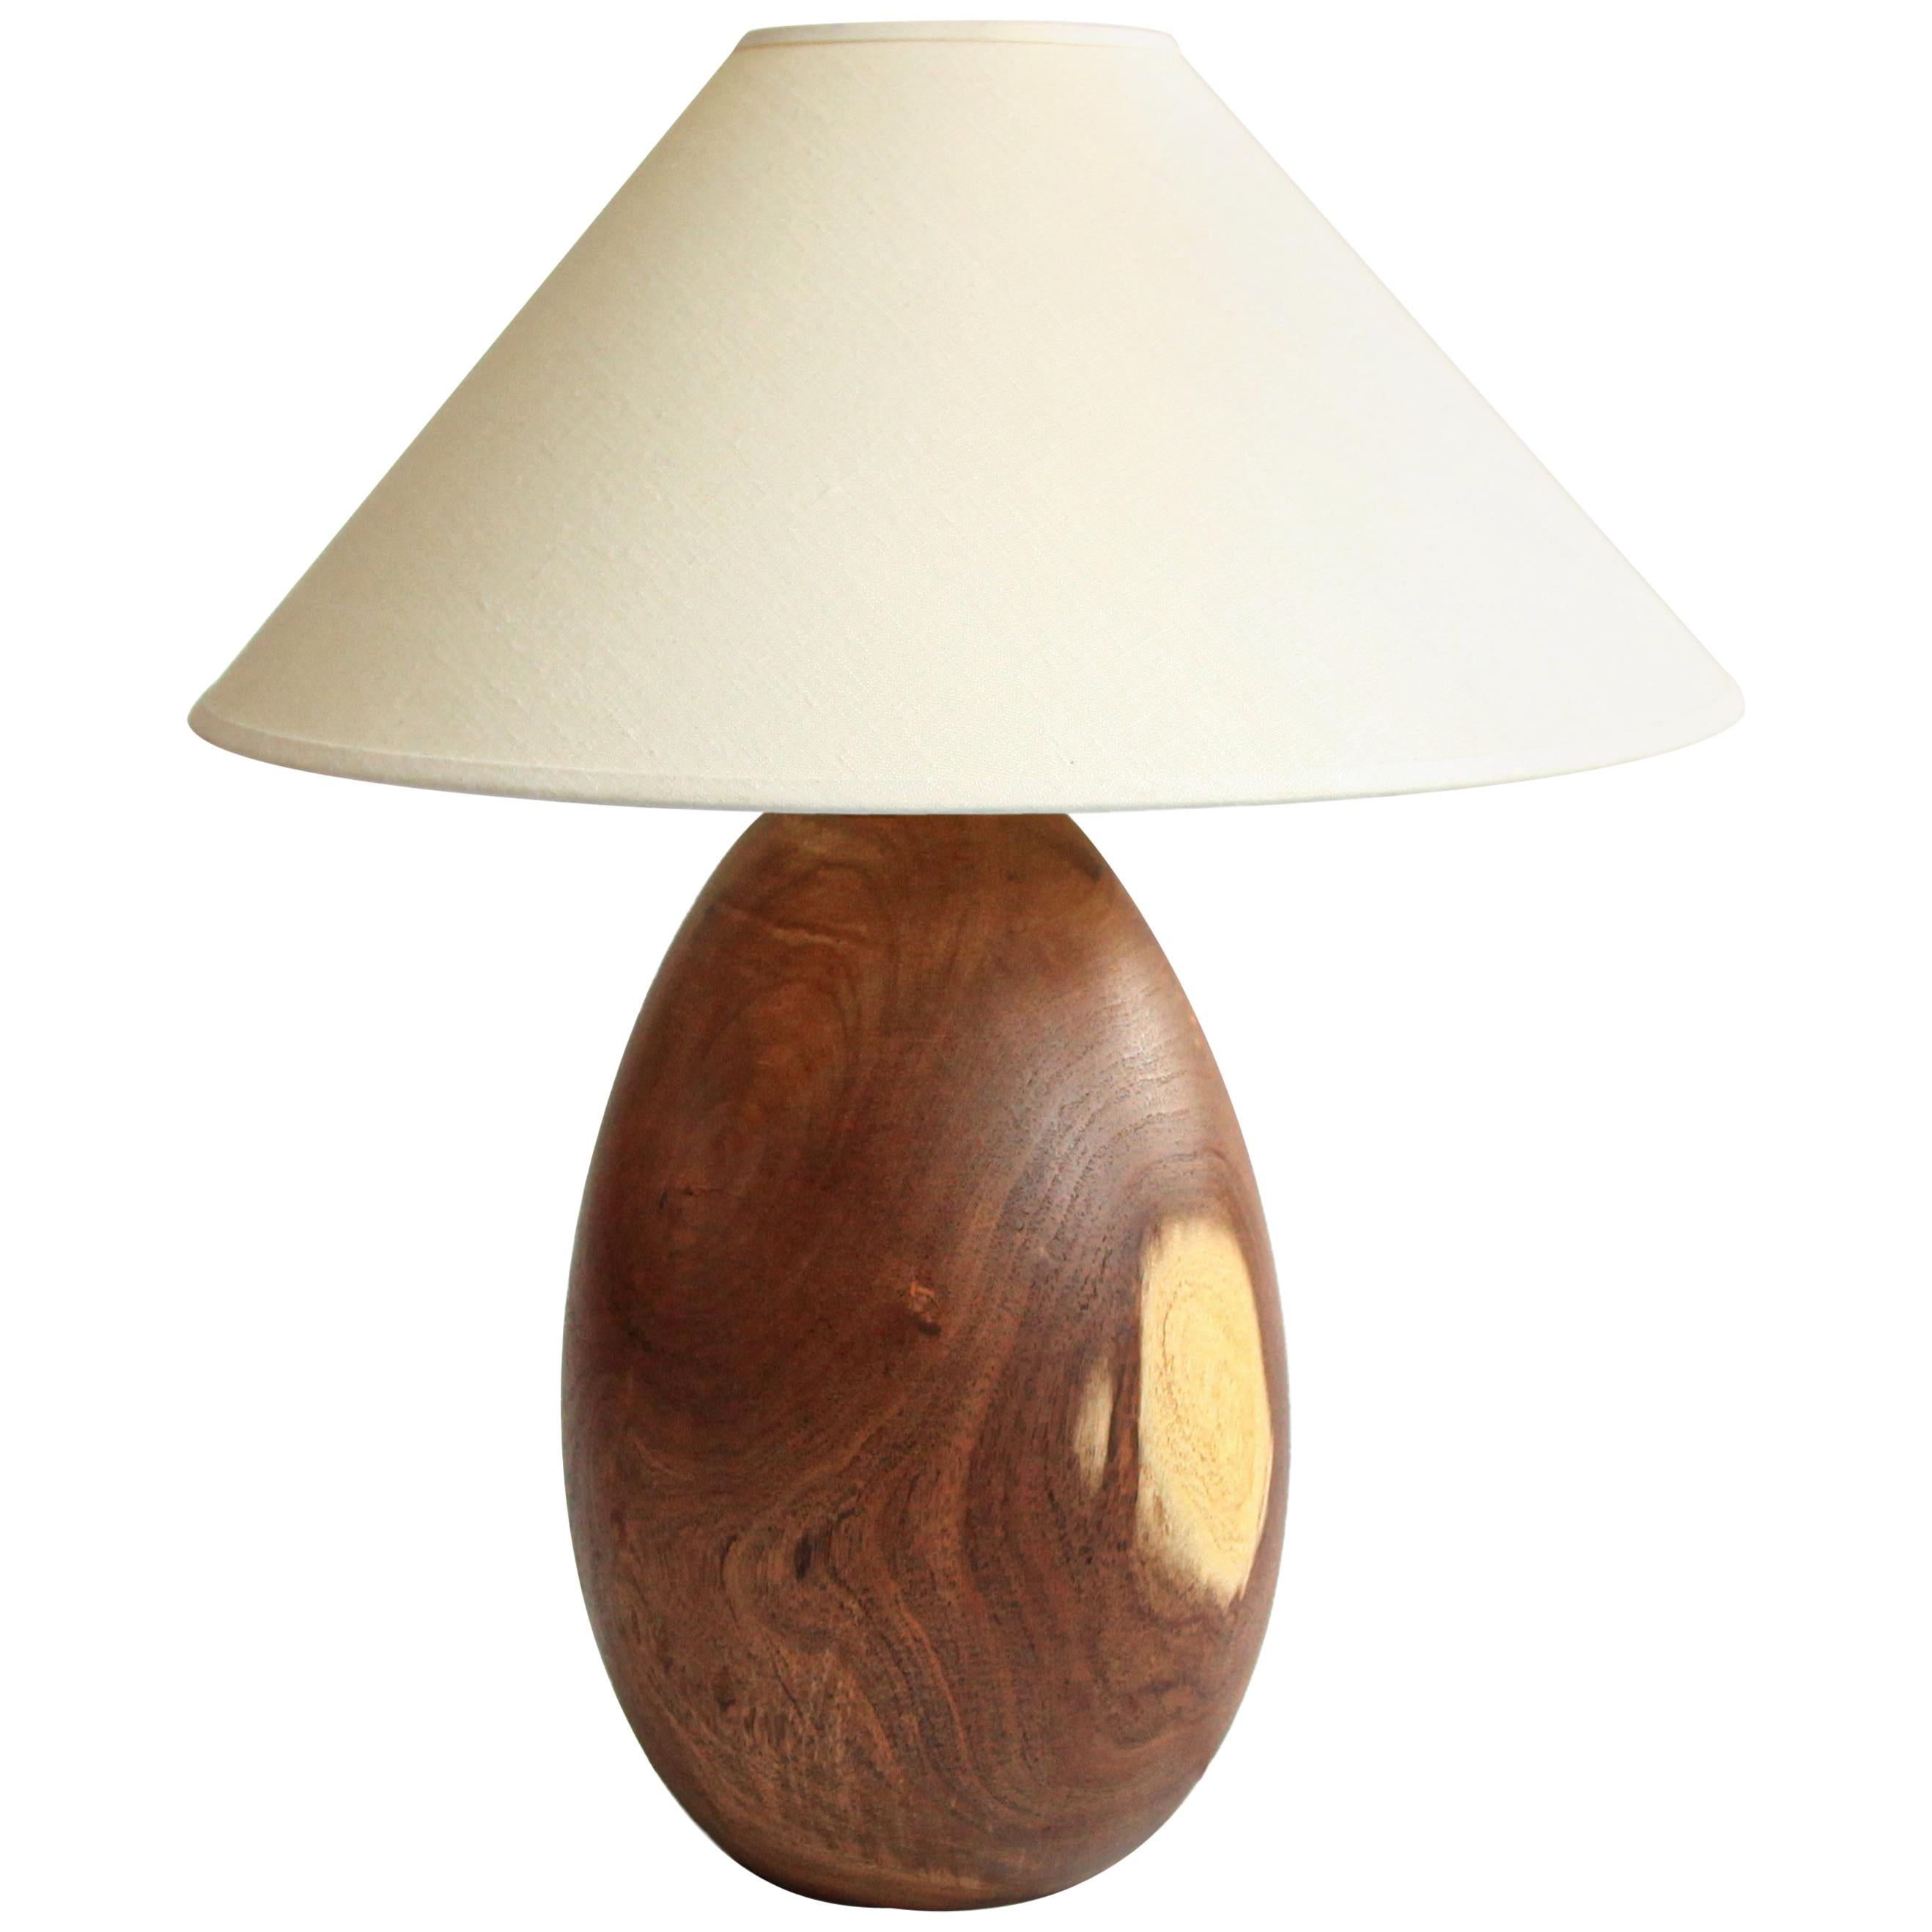 Tropical Hardwood Lamp + White Linen Shade, Medium Large, Árbol Collection, 30 For Sale